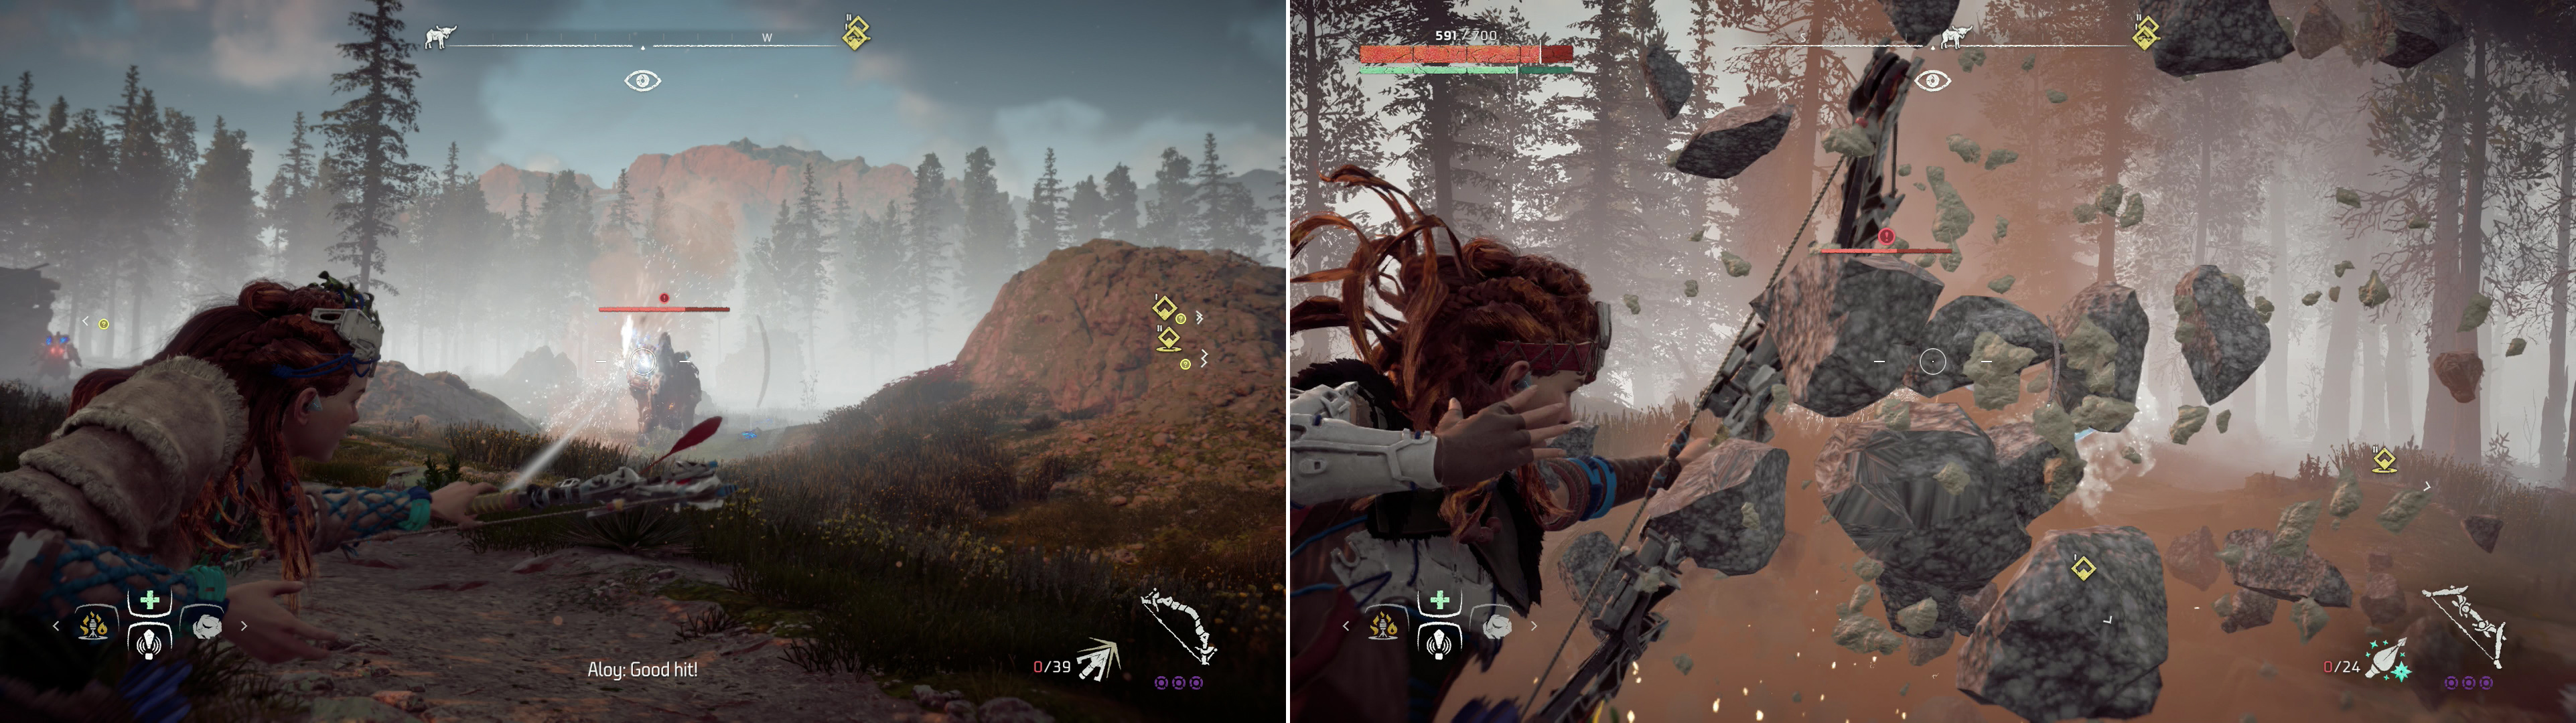 The Force Loaders on either side of the Behemoth’s face make excellent targets that deal respectible damage (left), but be wary, as the Behemoth is capable of responding with ranged attacks of its own (right).